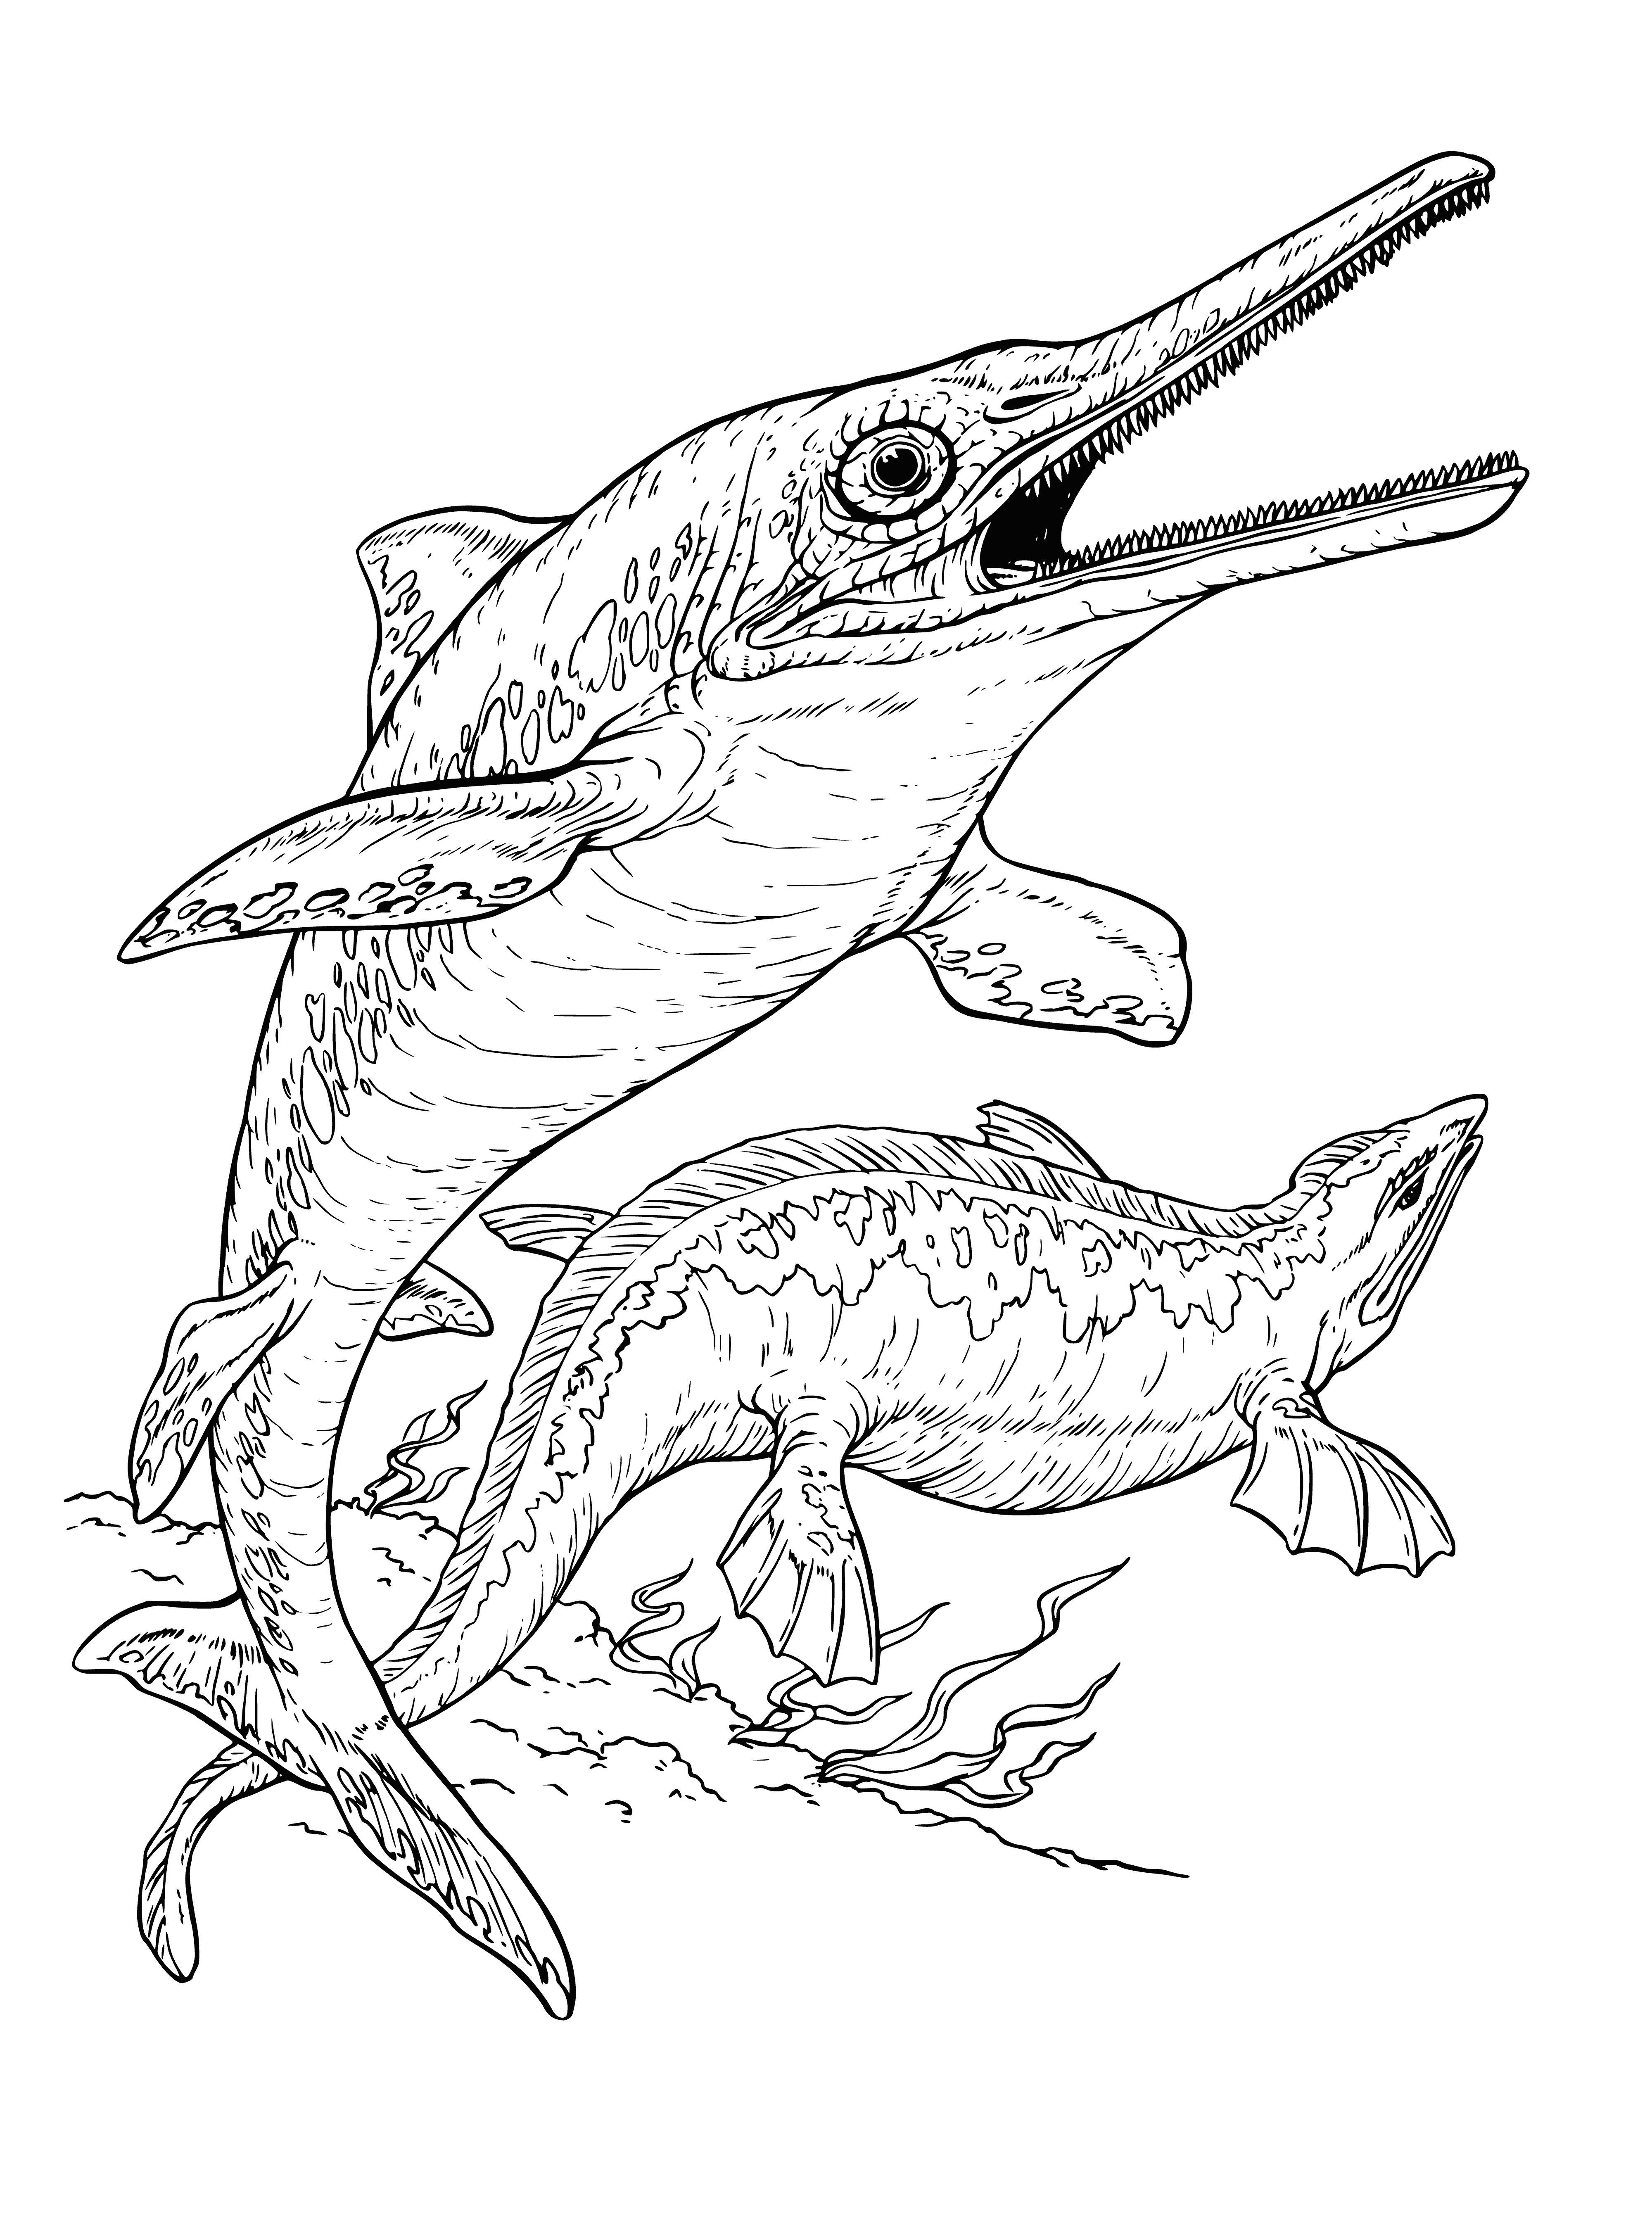 coloring page: Ichthyosaurs were powerful, sea-dwelling predators of the Mesozoic era. Growing up to 50ft long, they had a streamlined body, small head, toothless mouth and sharp teeth. They were adapted to life in the water and were some of the largest predators of their time.